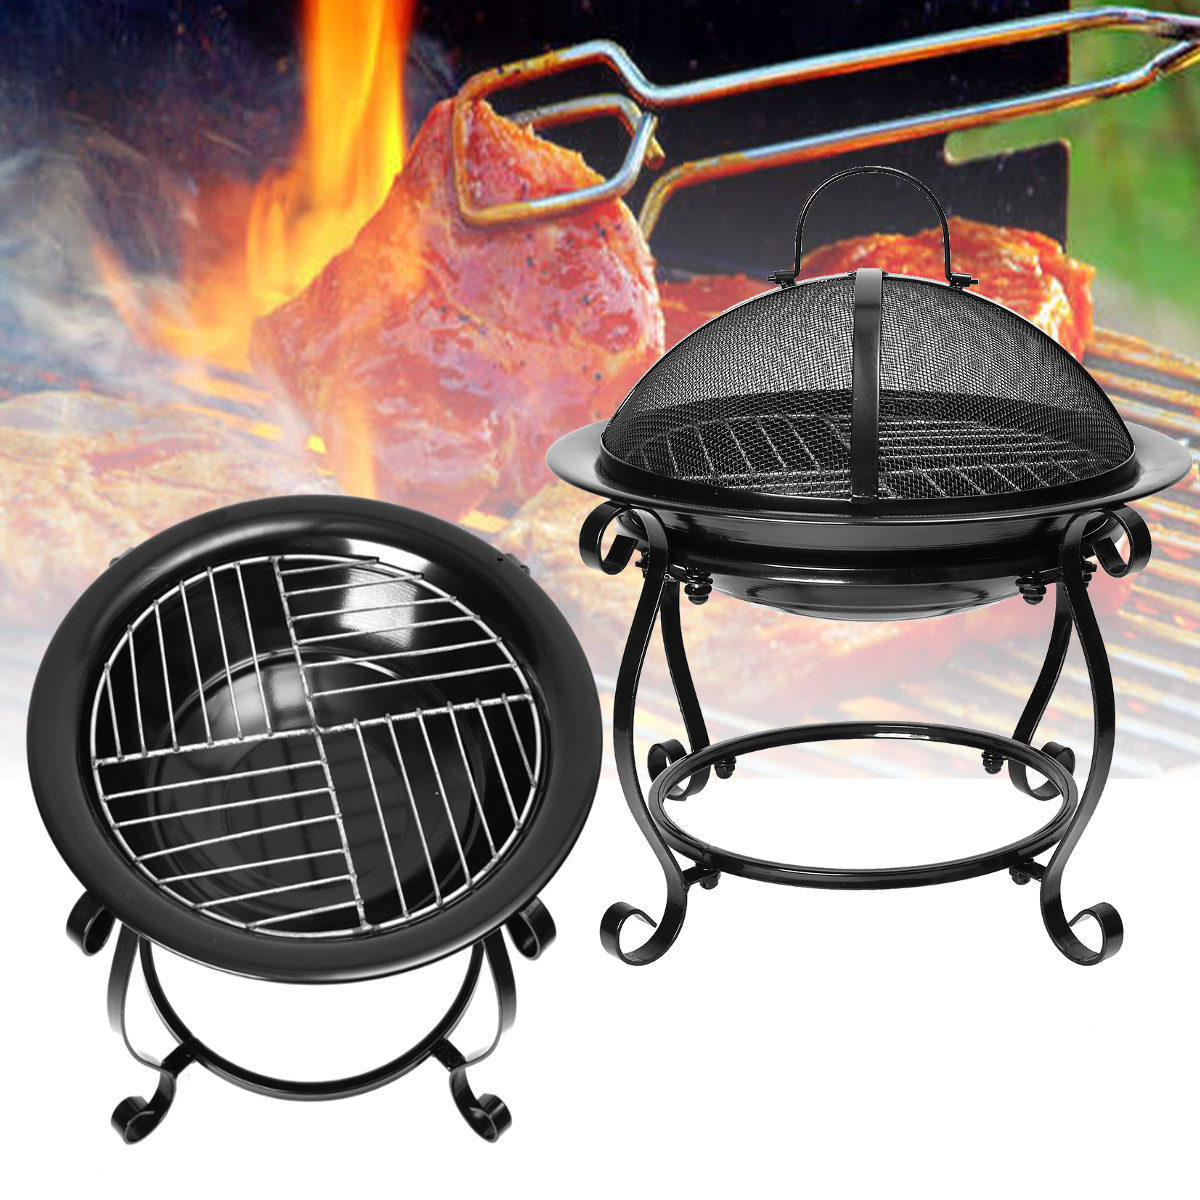 Outdoor BBQ Cooking Stove Portable Picnic Iron Fireplace Heater Garden Party Grill Barbecue Rack